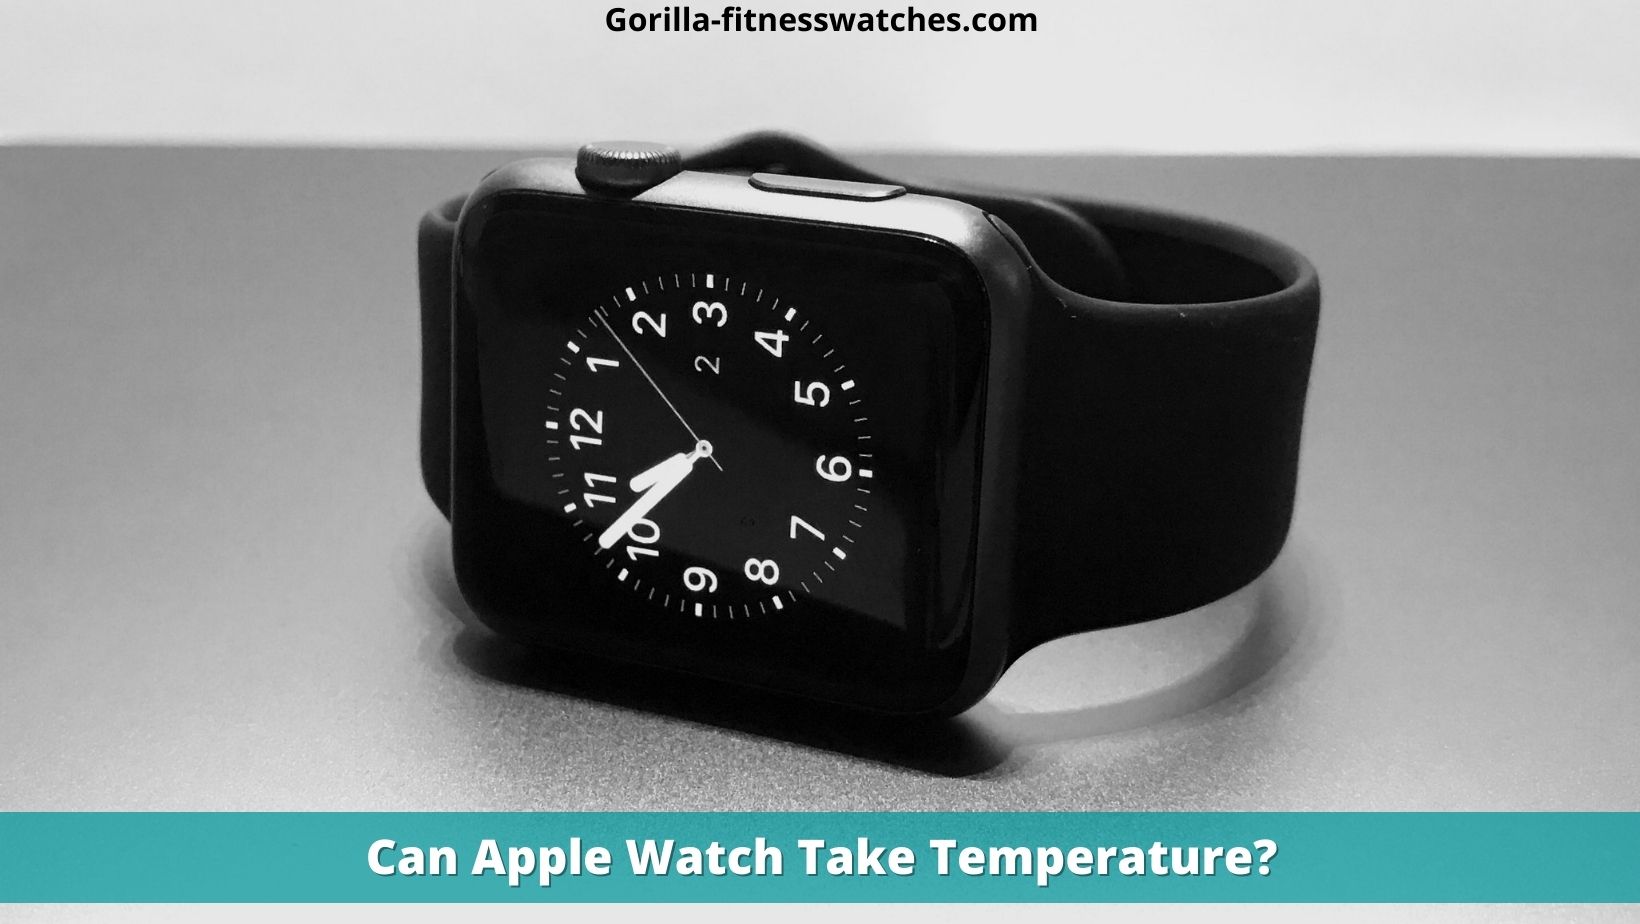 Can Apple Watch Take Temperature?